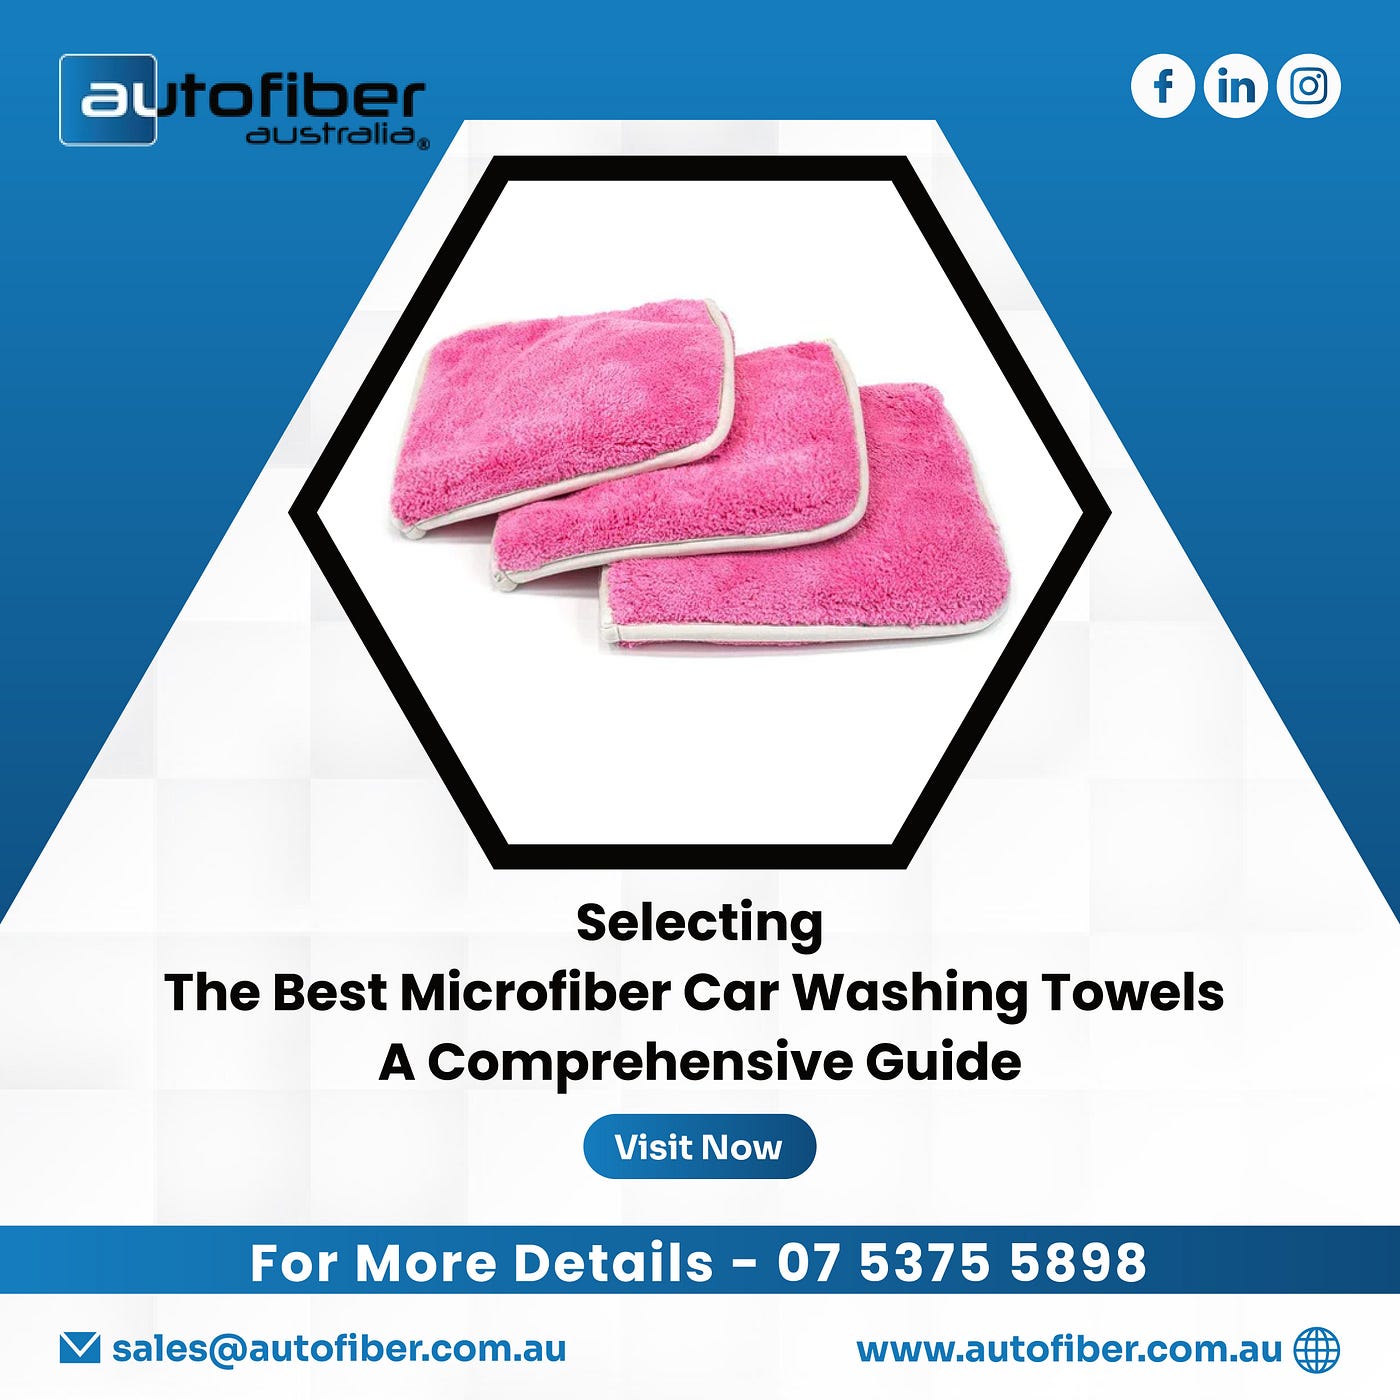 Complete Manual on Washing Microfiber Car Towels and Choosing the